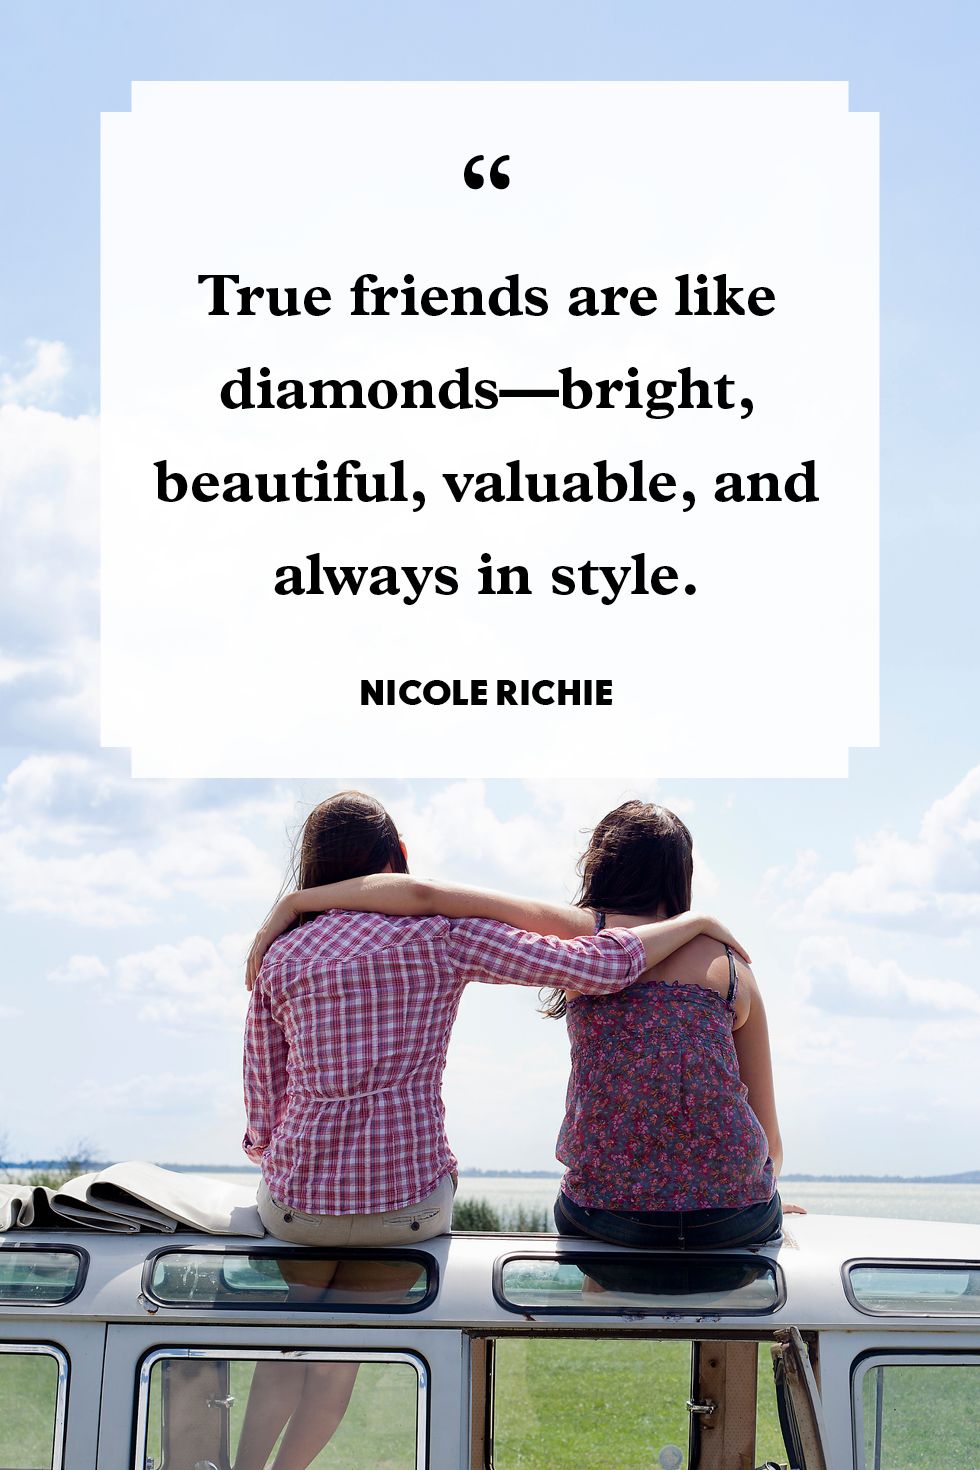 great friends quotes and sayings